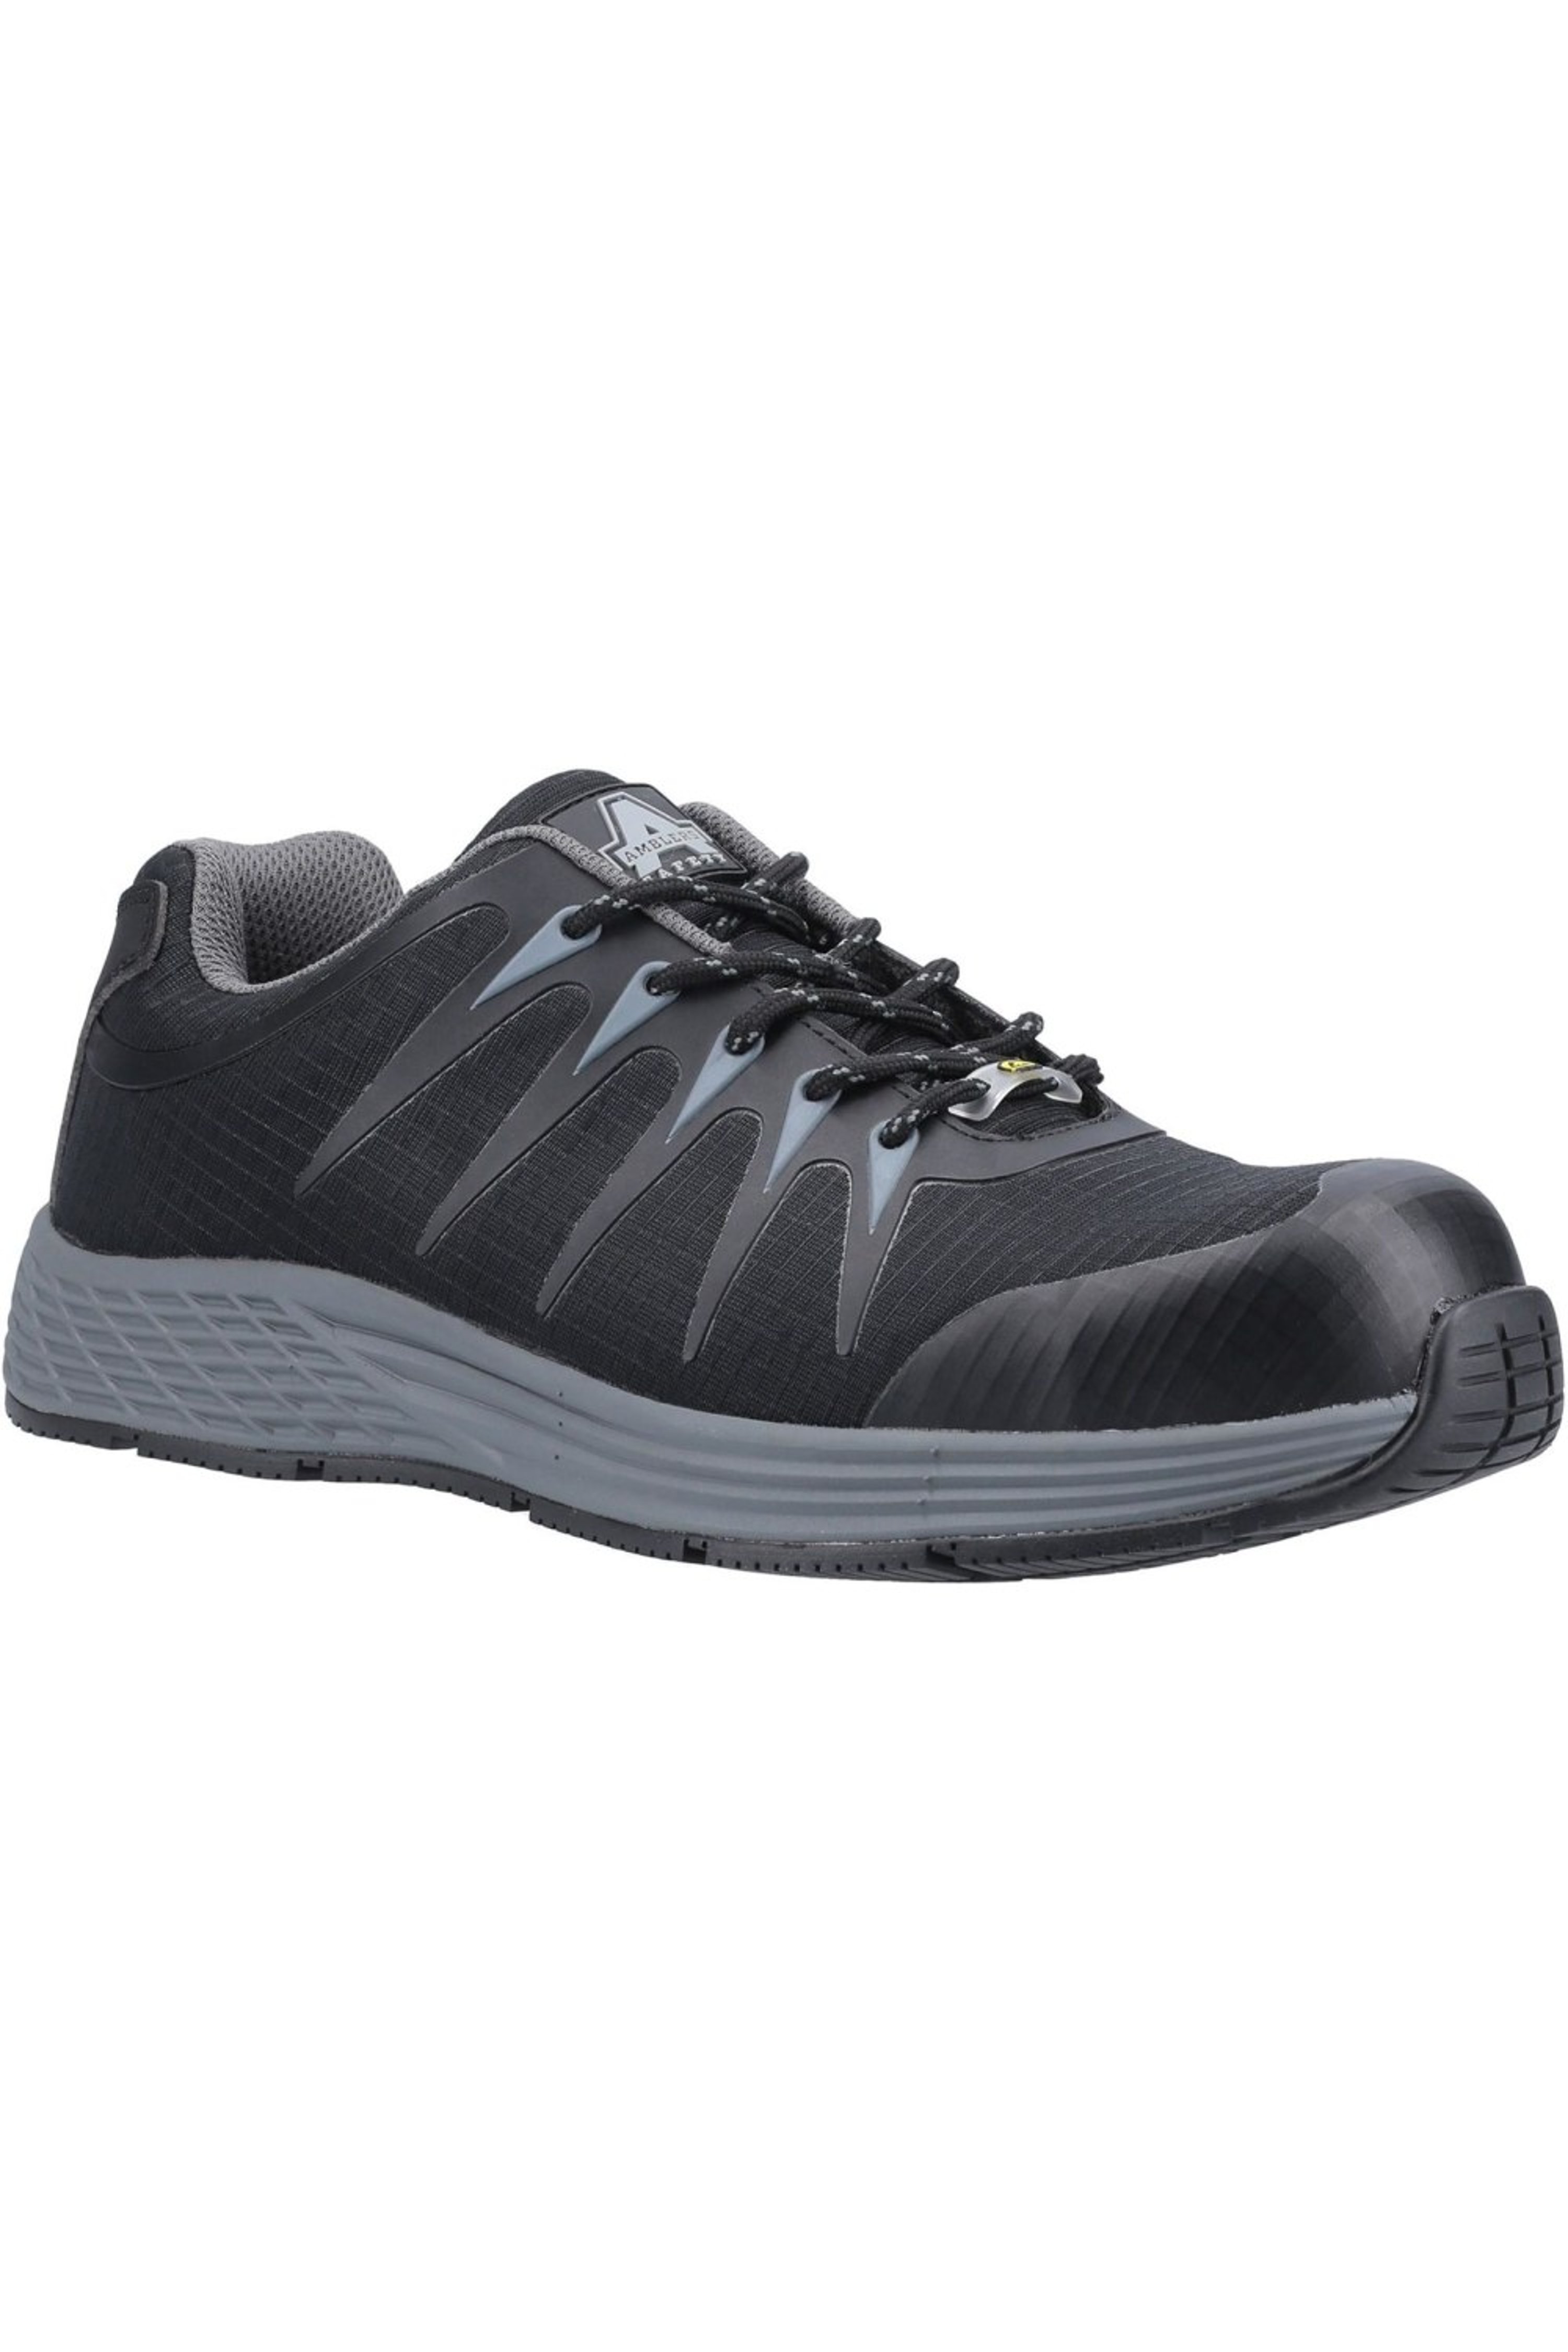 Amblers Unisex Adult As717c Safety Trainers In Black